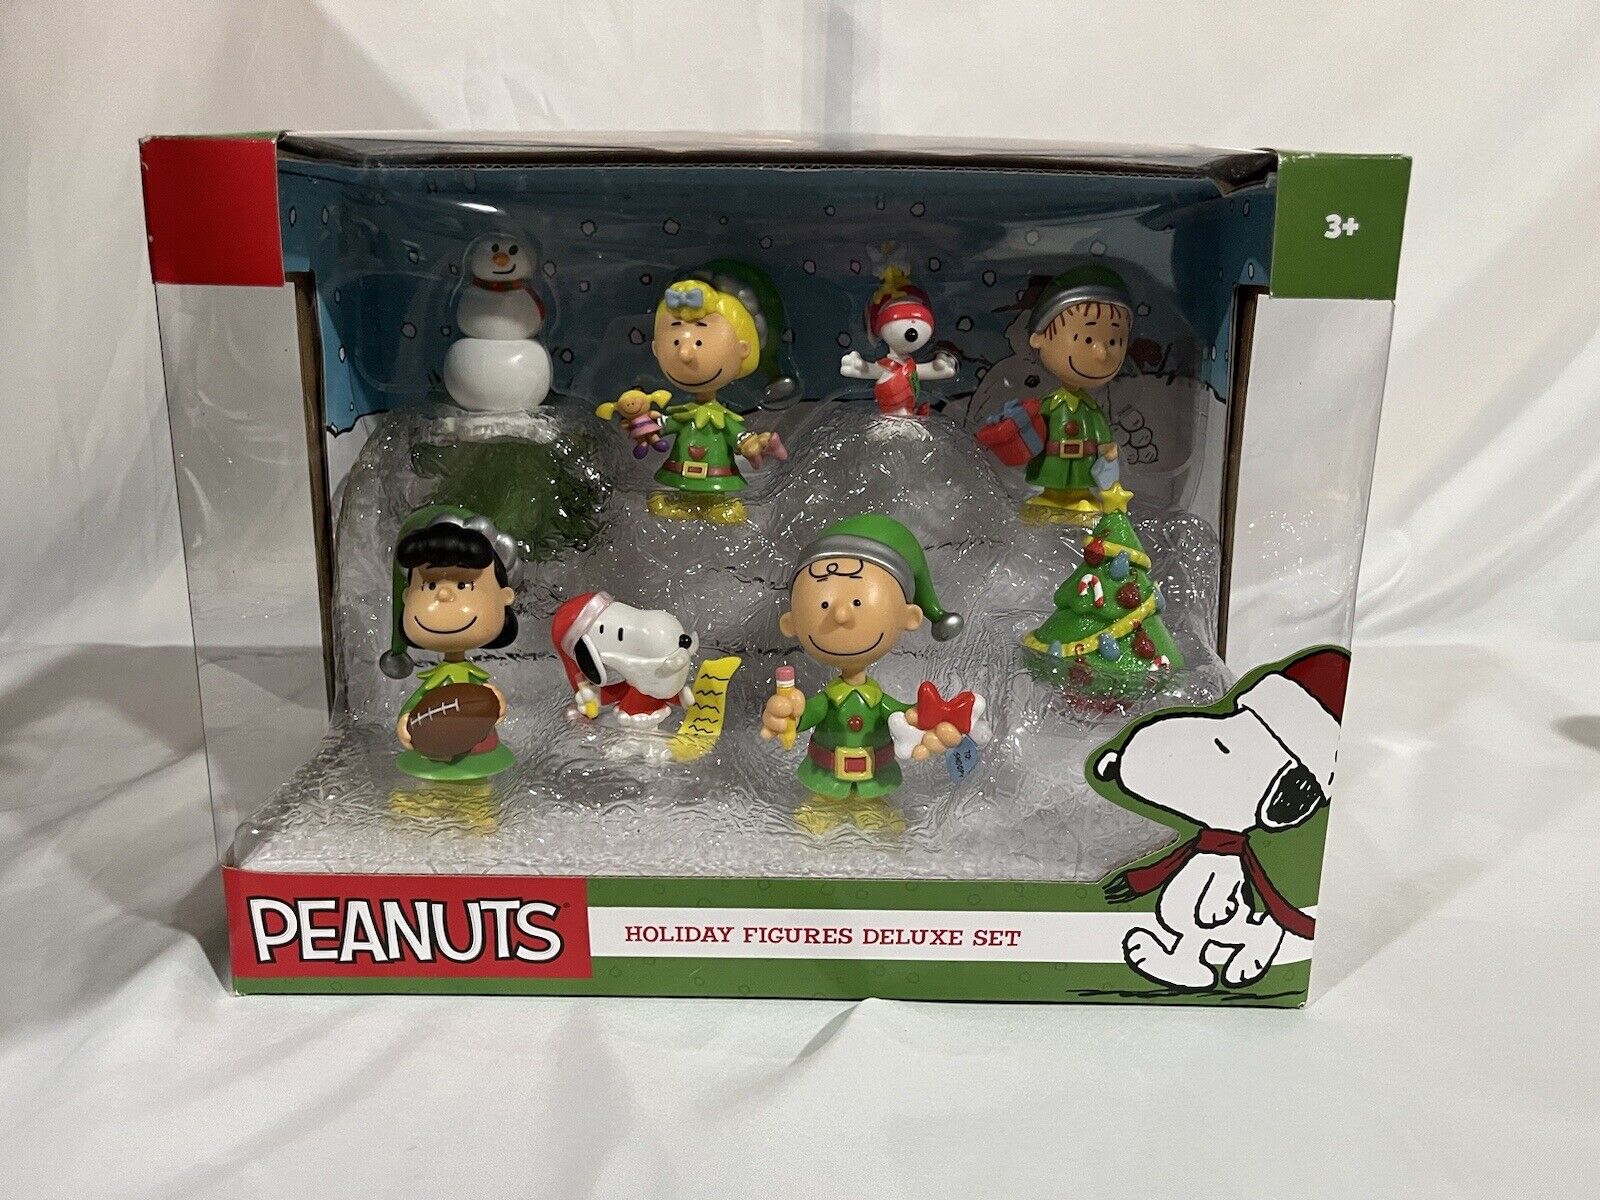 Peanuts Holiday Figure Deluxe Set 